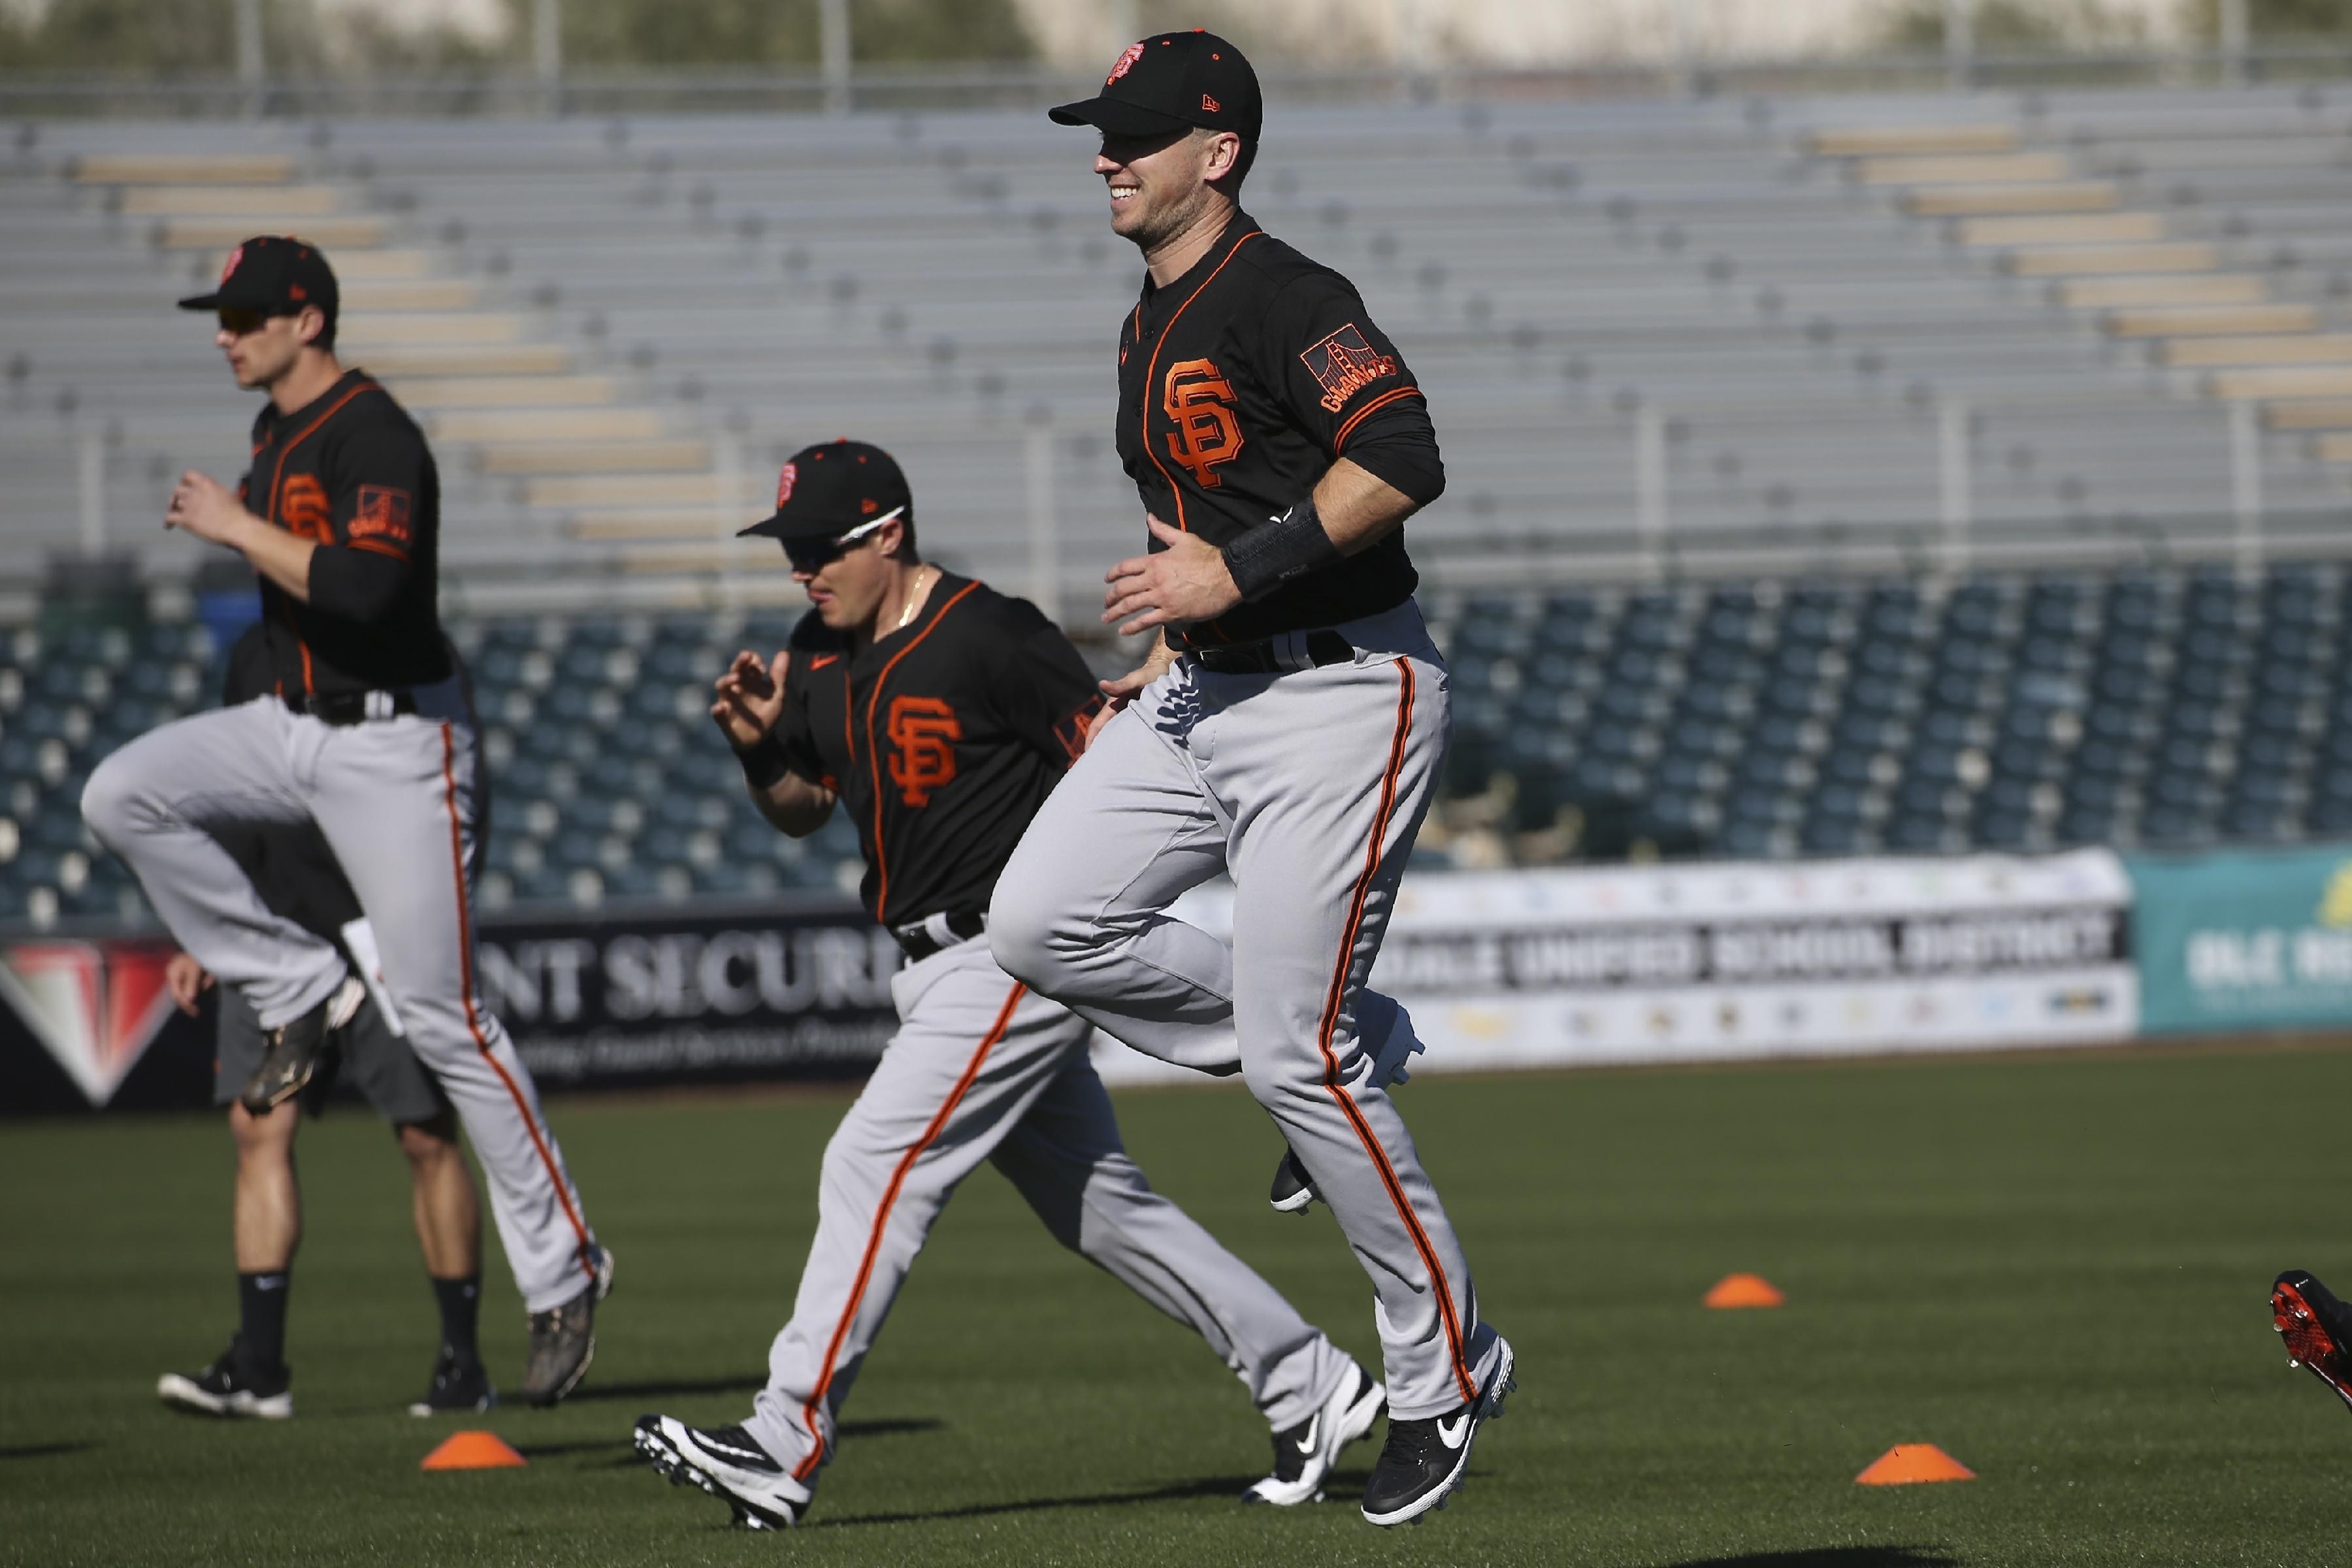 Buster Posey Feeling Healthy At Last Power Stroke Returning The